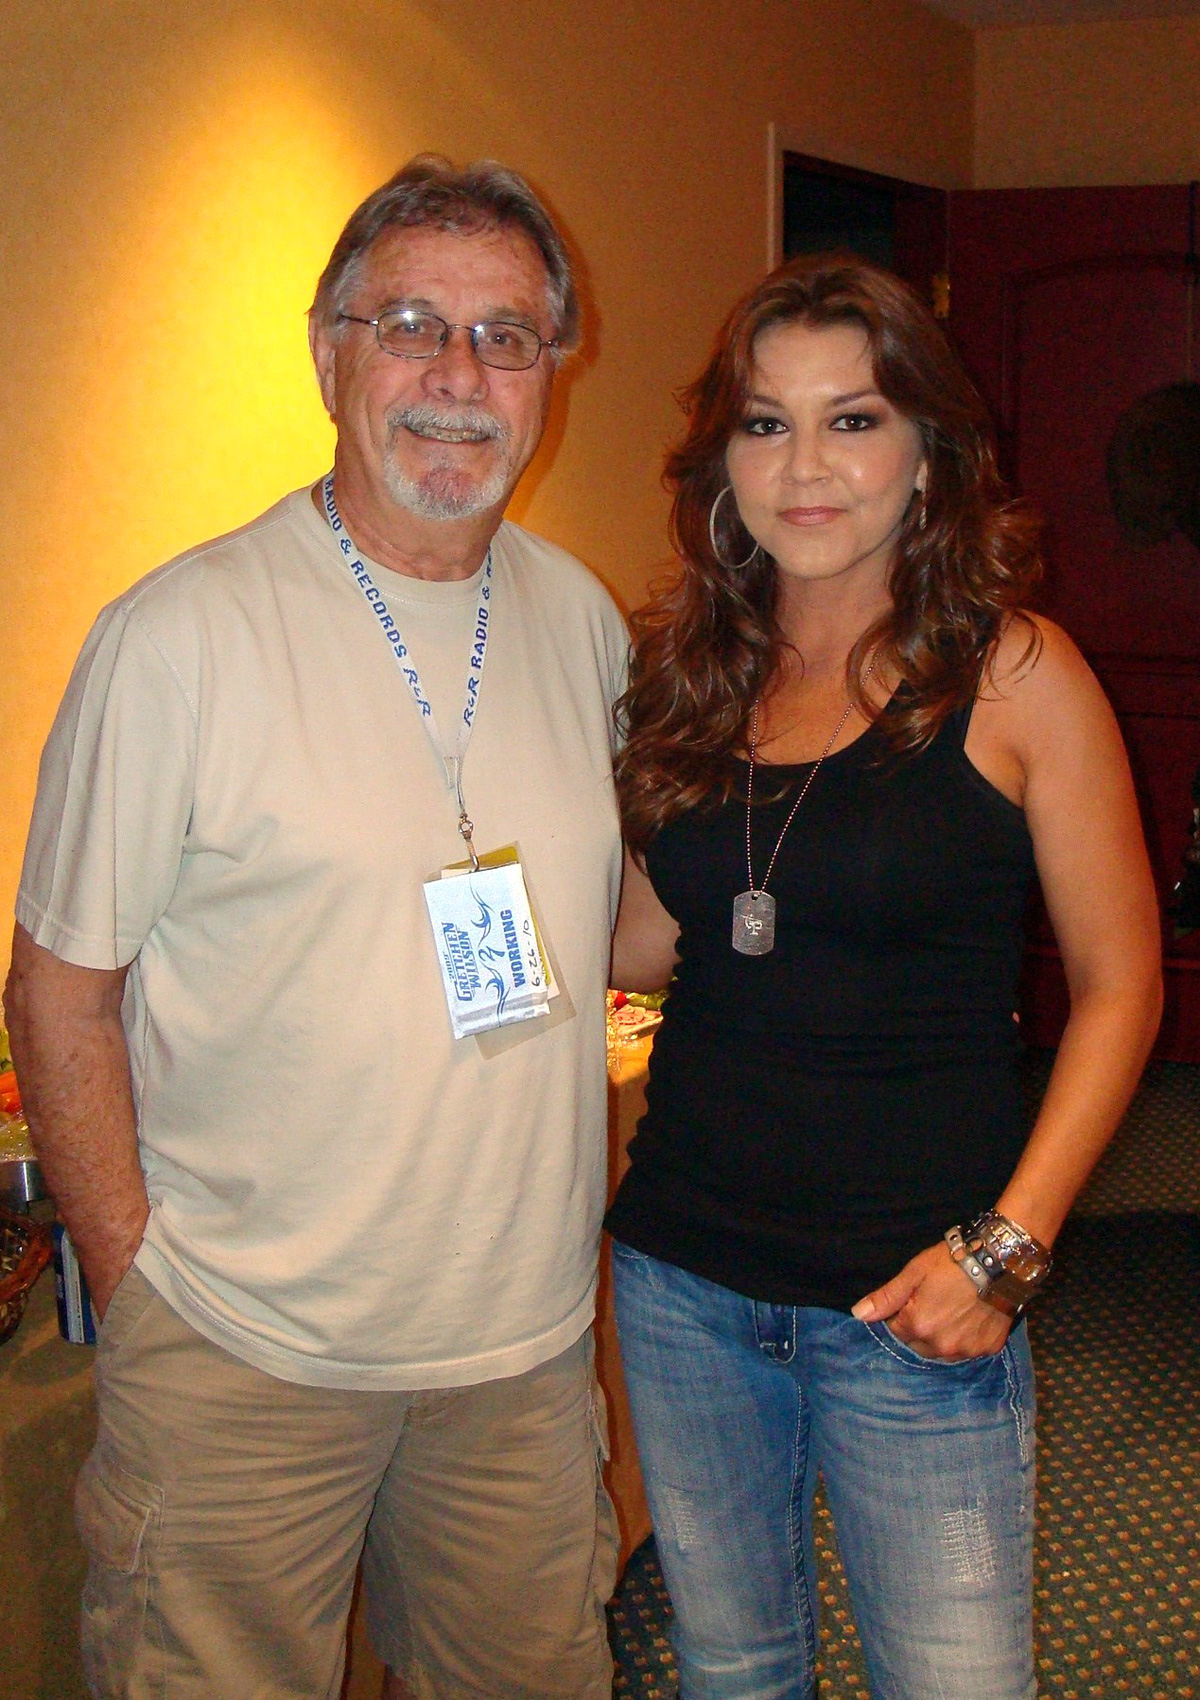 "The Road" welcomes Gretchen Wilson